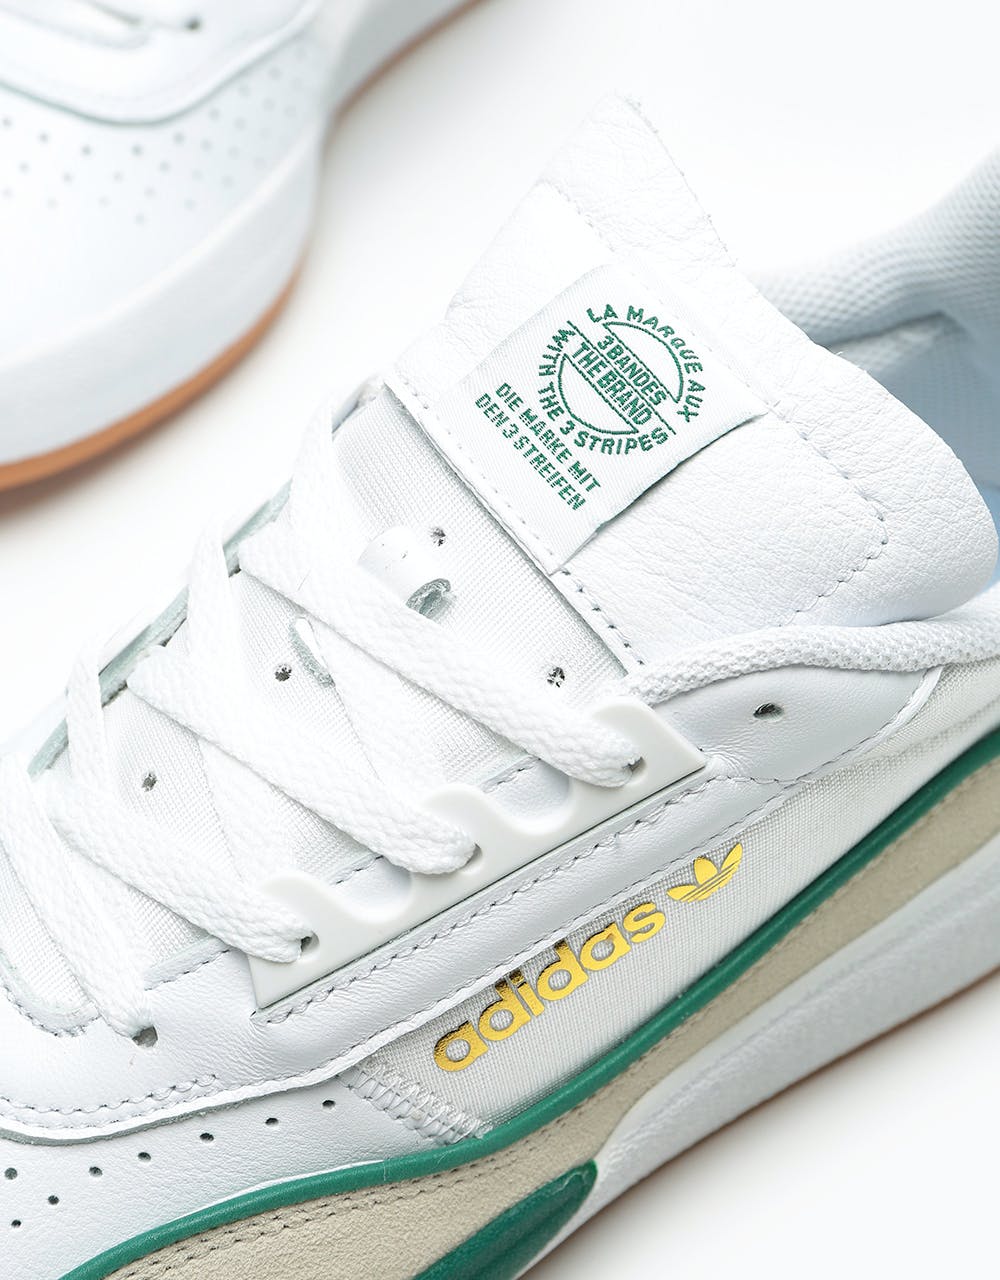 Adidas Liberty Cup Skate Shoes - White/Collegiate Green/Clear Brown